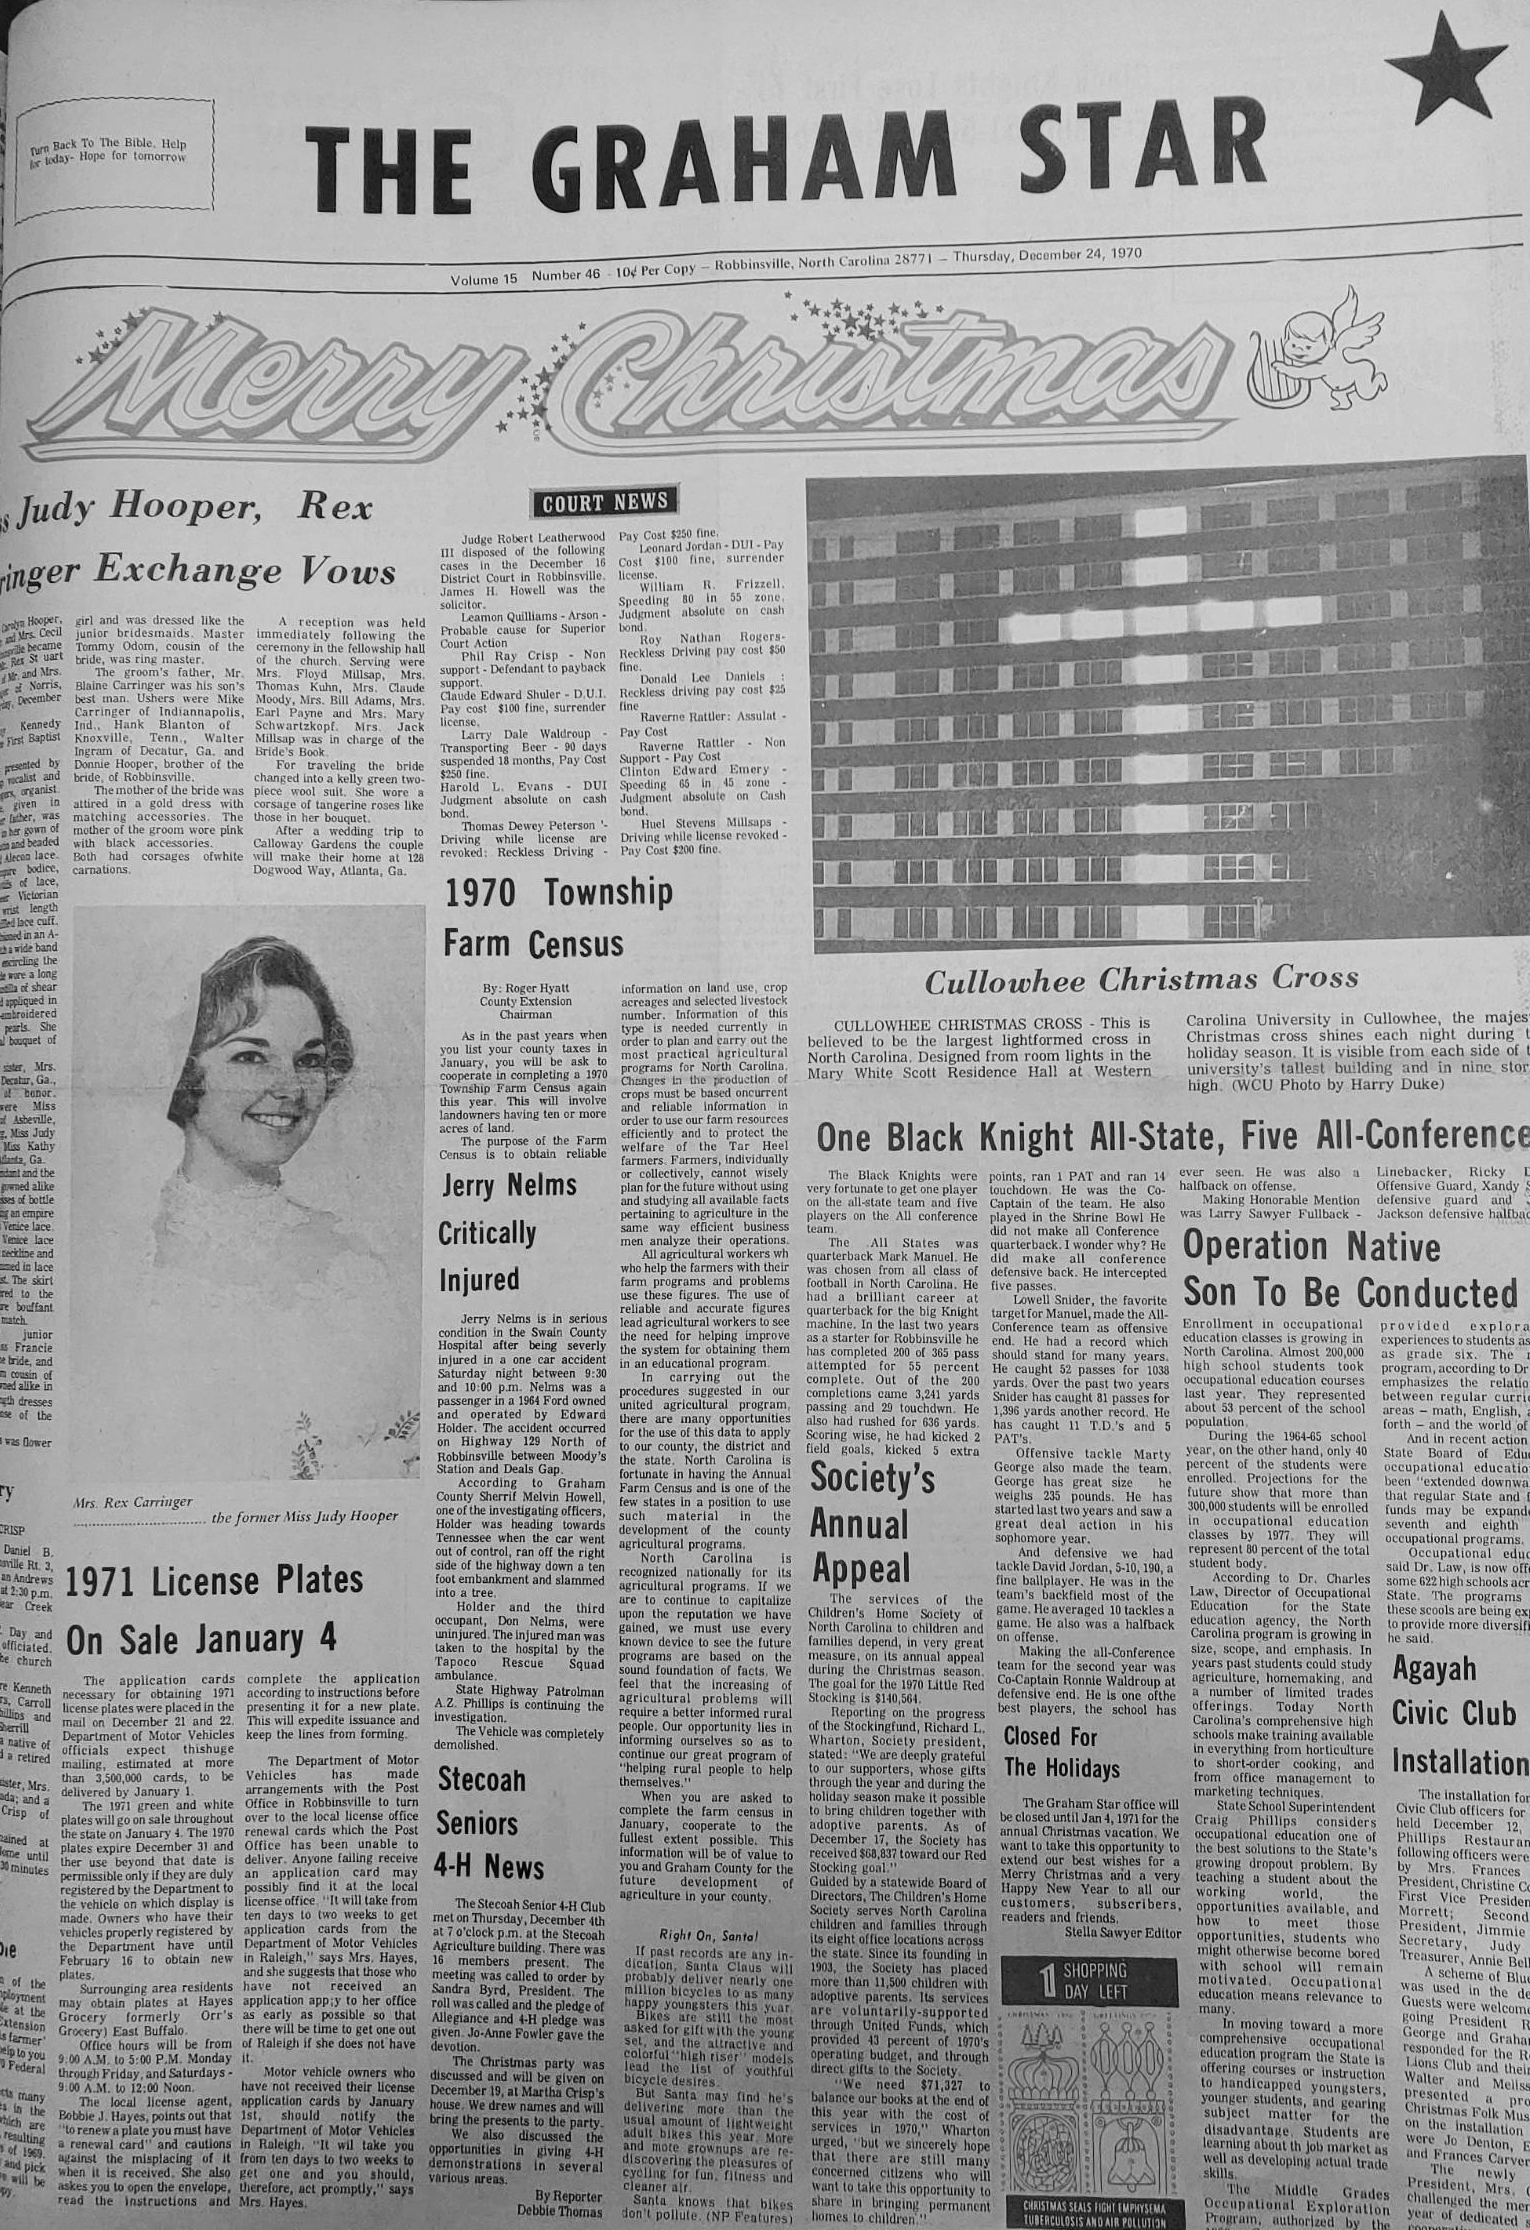 The Graham Star’s front page from 50 years ago (Dec. 24, 1970).